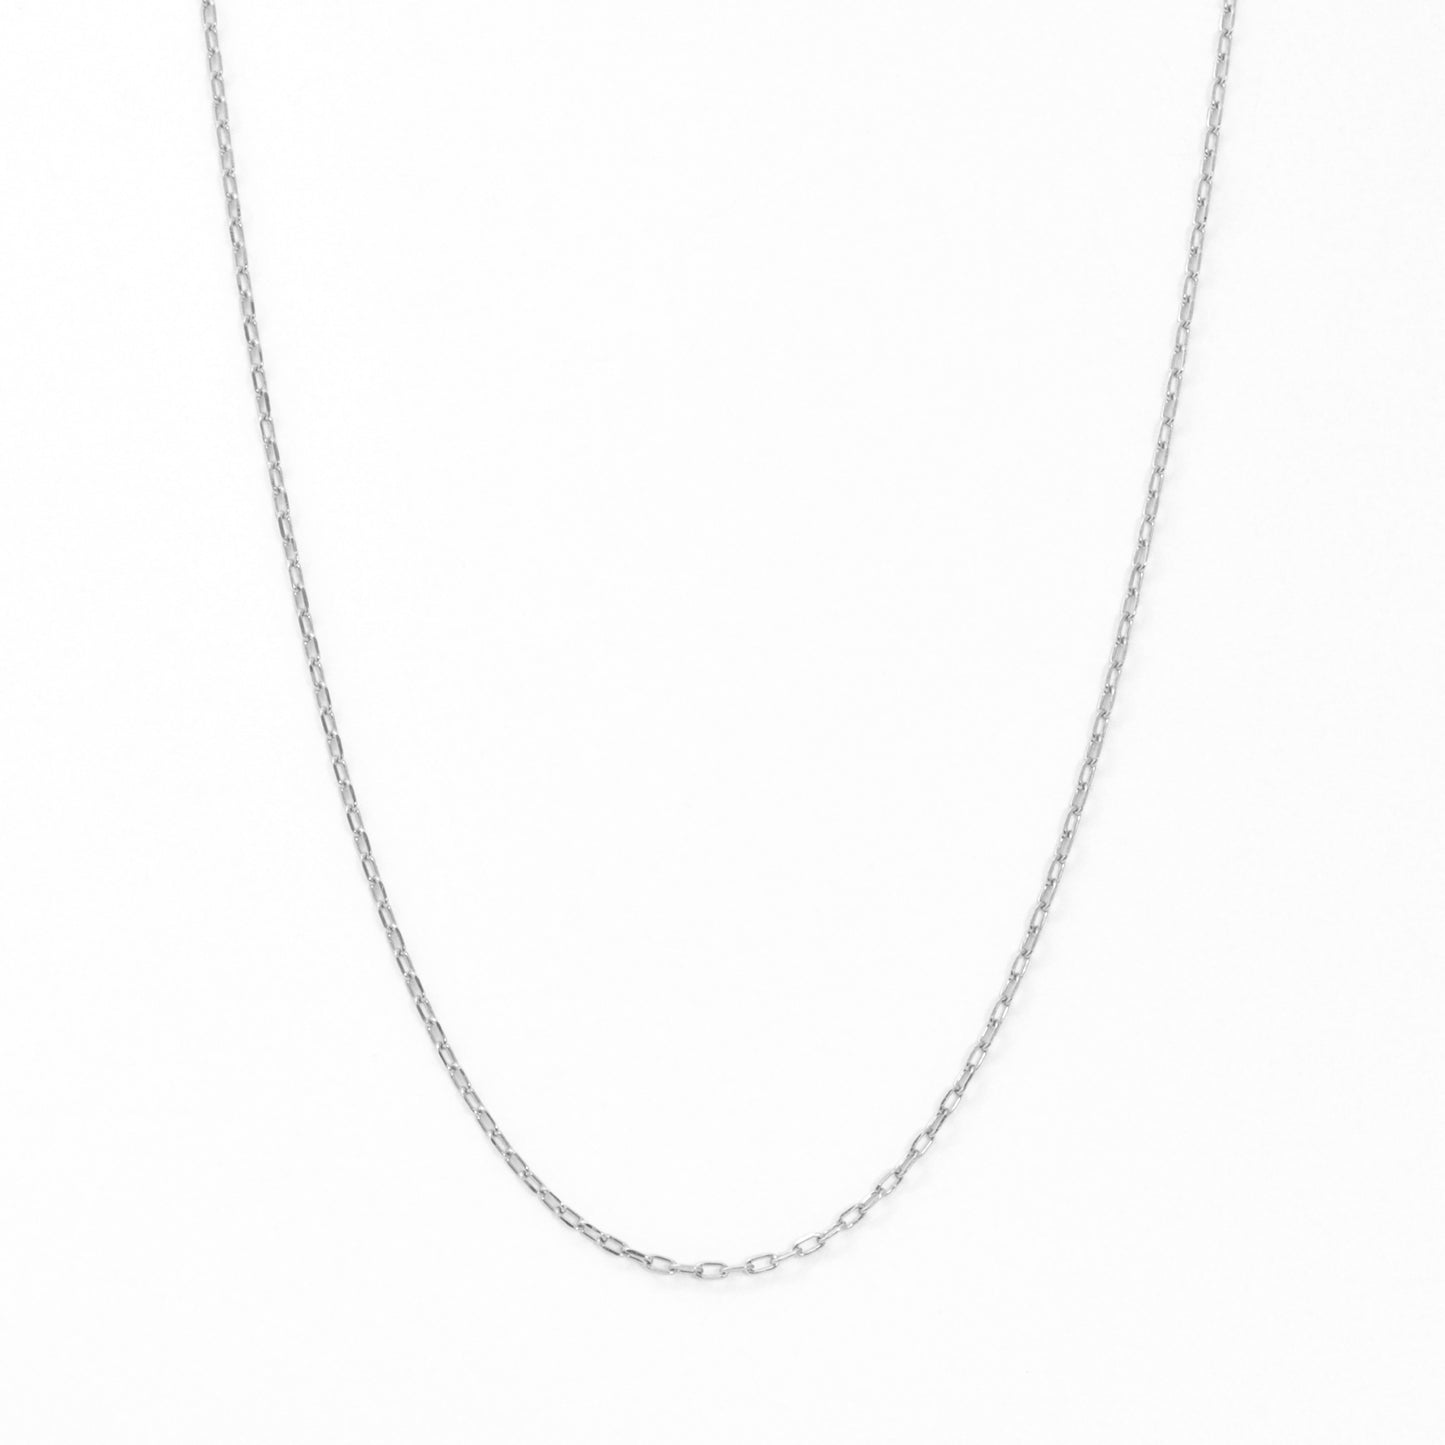 [Palette] 10K White Gold Slide Pin Chain Necklace - Product Image